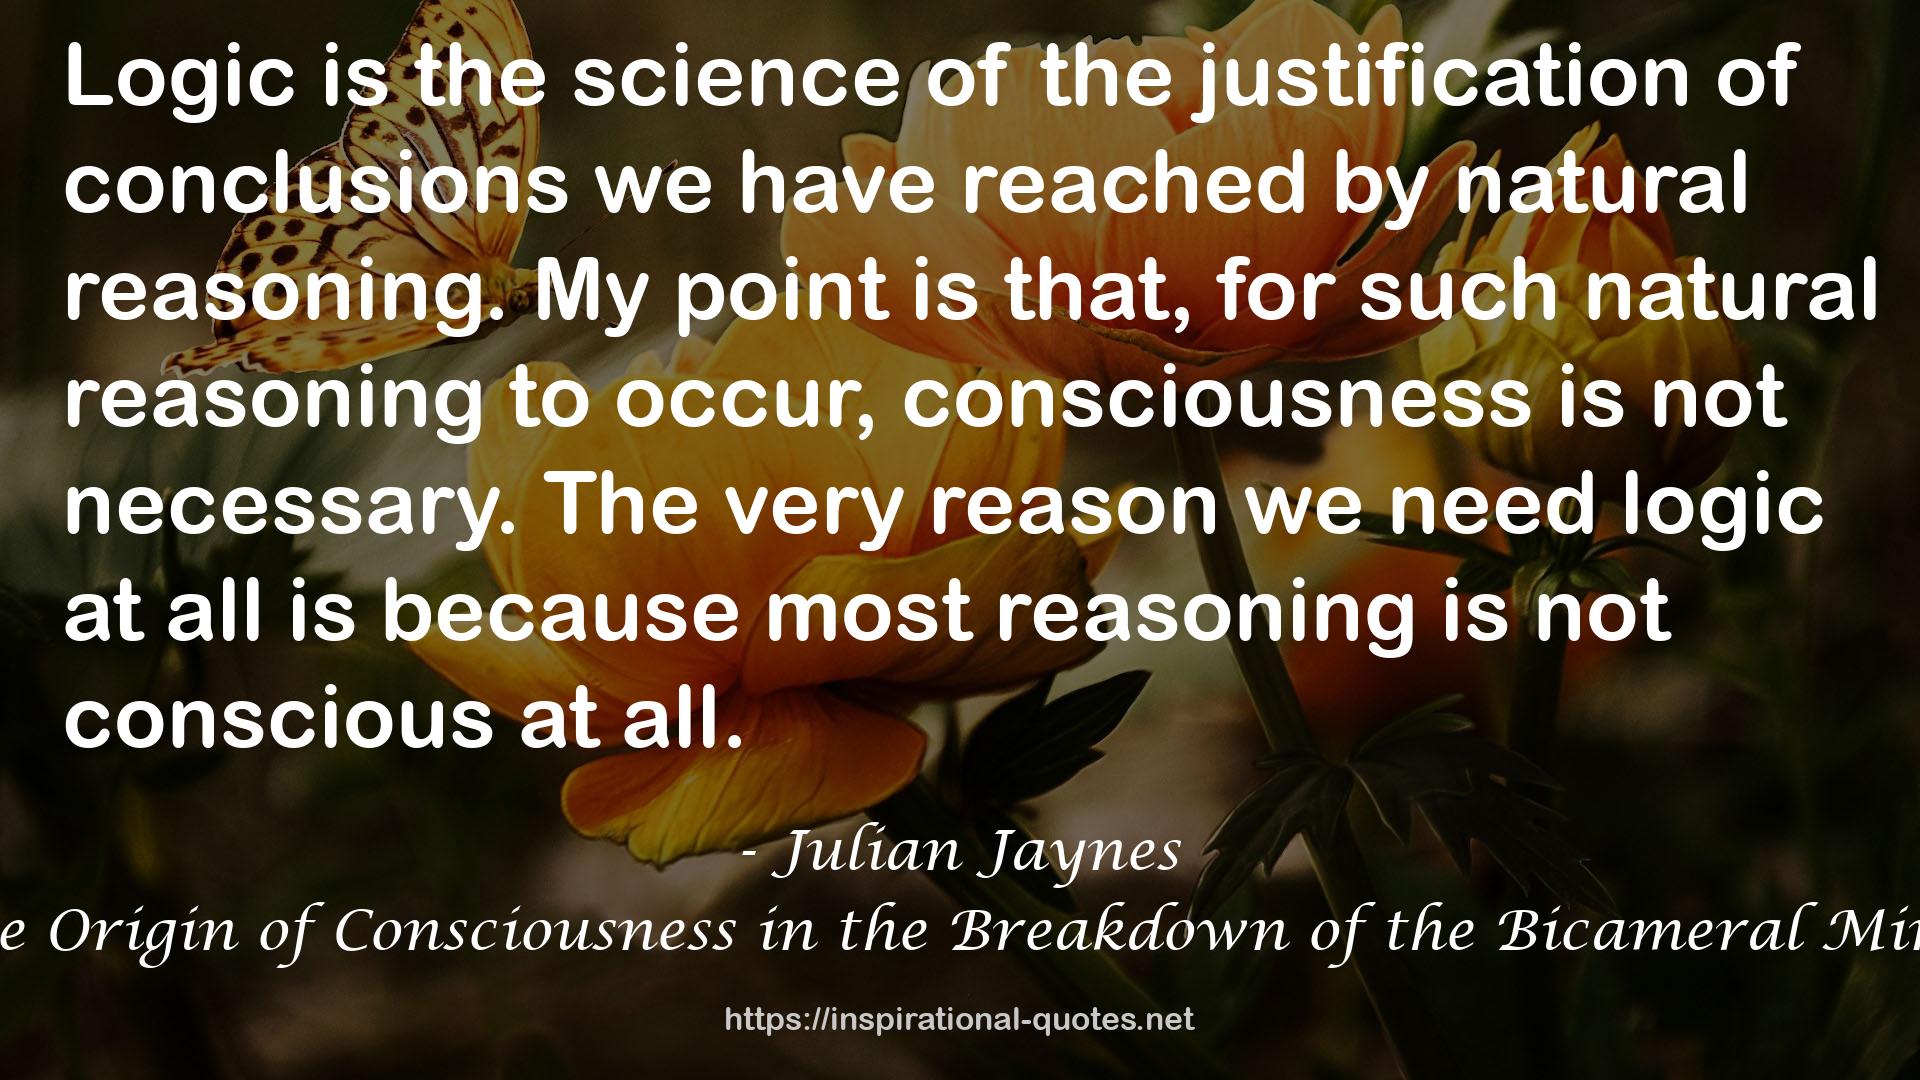 The Origin of Consciousness in the Breakdown of the Bicameral Mind QUOTES